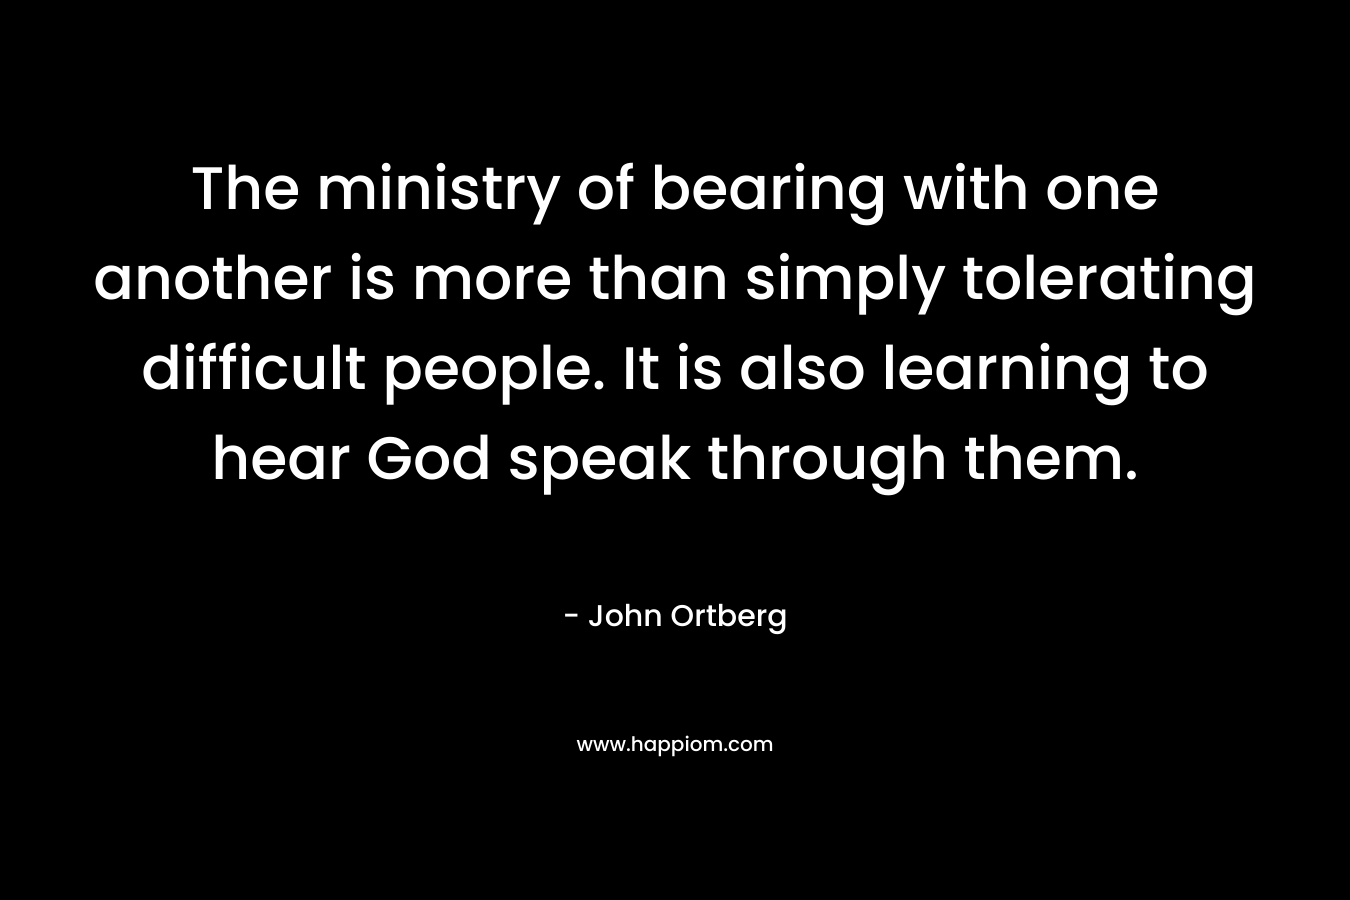 The ministry of bearing with one another is more than simply tolerating difficult people. It is also learning to hear God speak through them. – John Ortberg